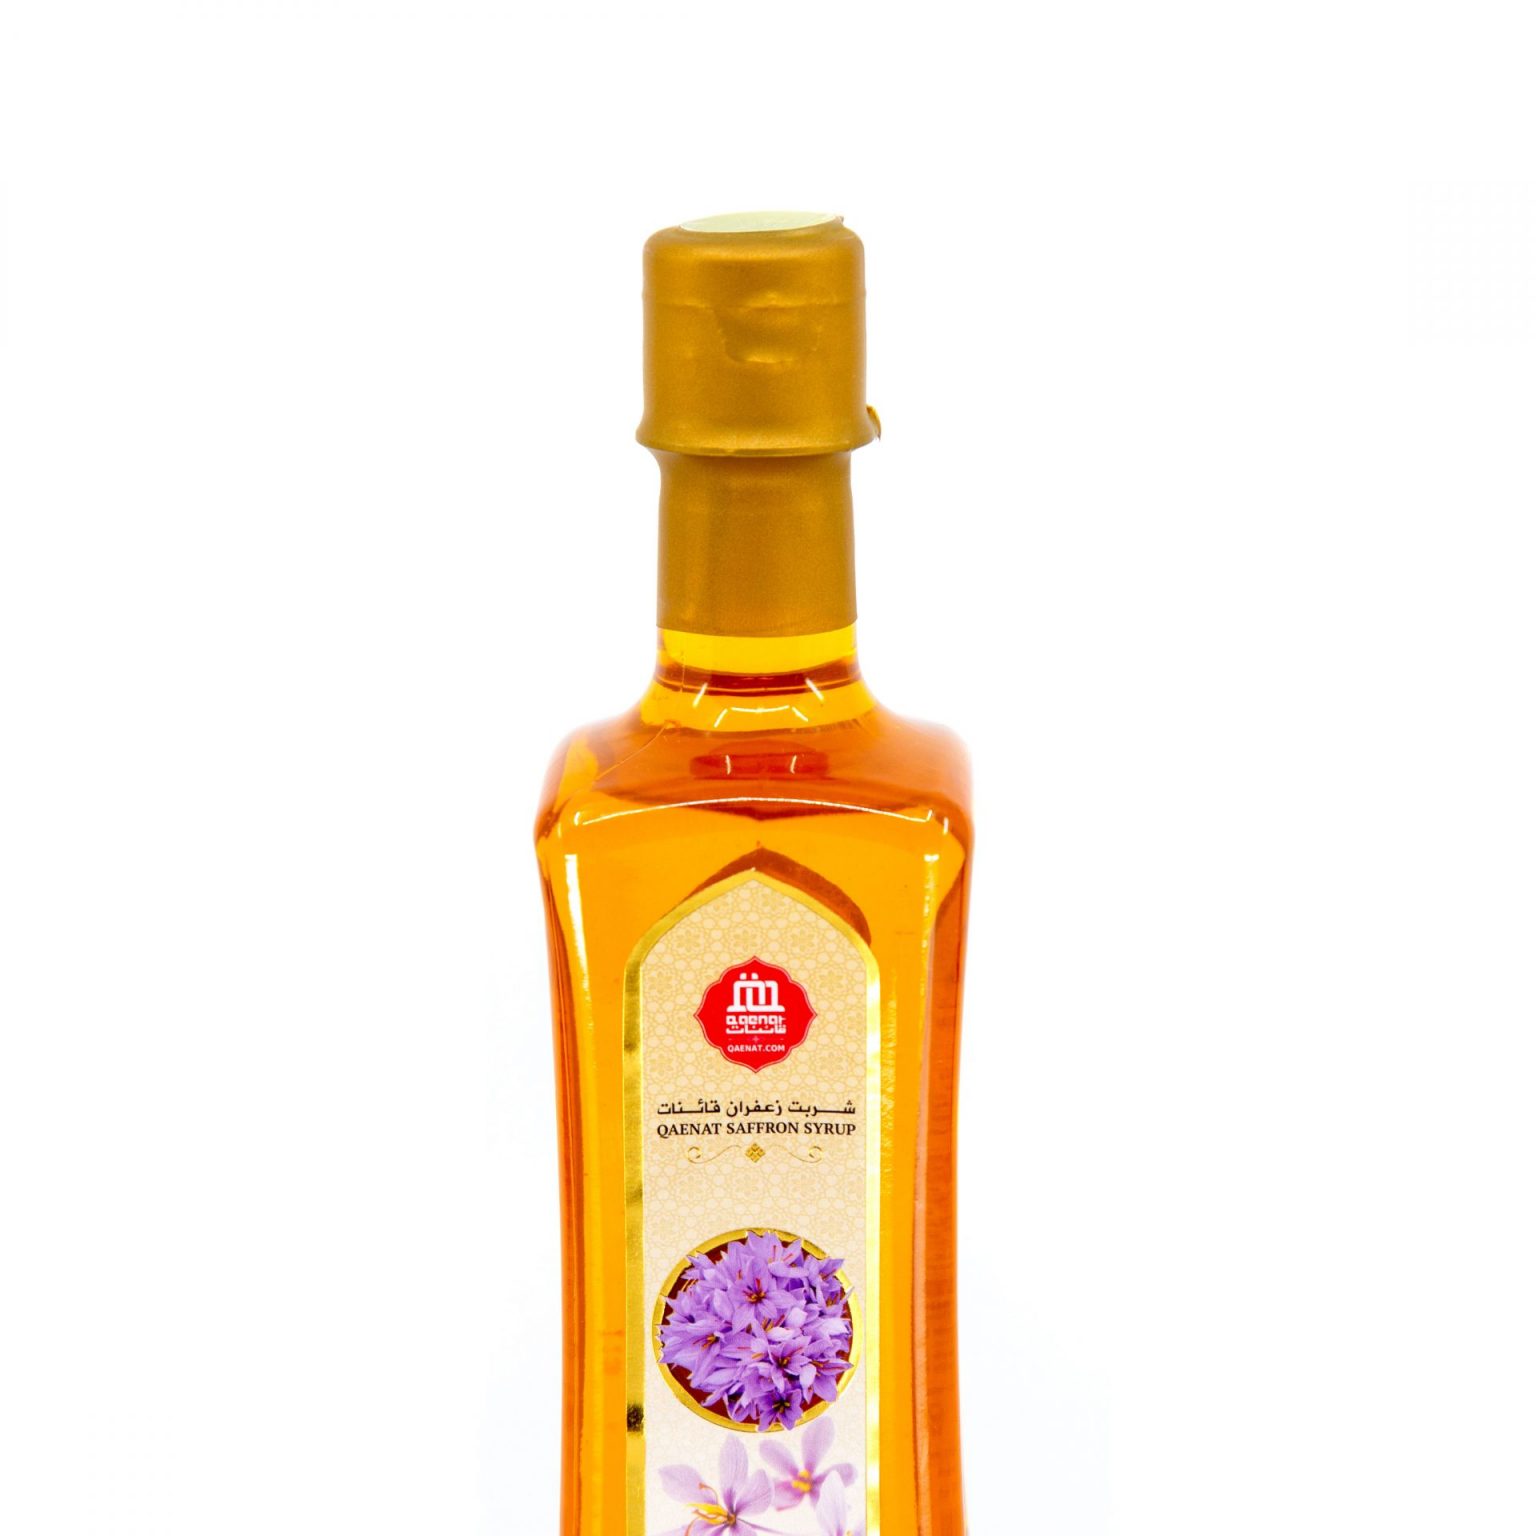 What is the way to use the refreshing saffron syrup??